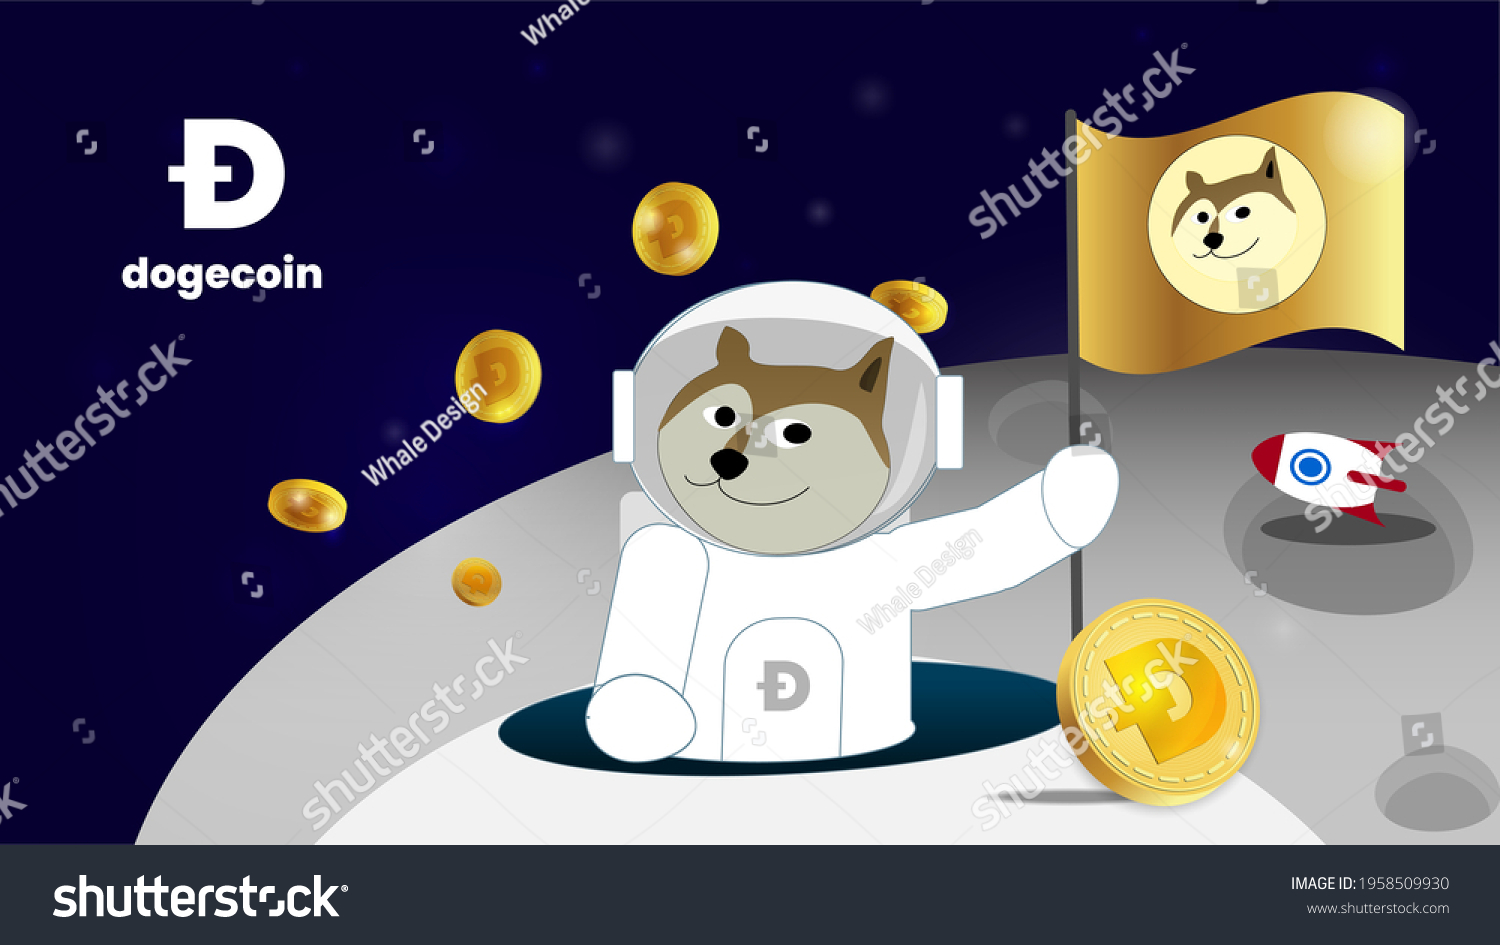 SVG of Dogecoin to the moon is gme stock in cryptocurrency market like a blockchain digital exchange in the future. The banner has a Shiba inu on the spaceship took dogecoins to the moon with a golden flag  svg